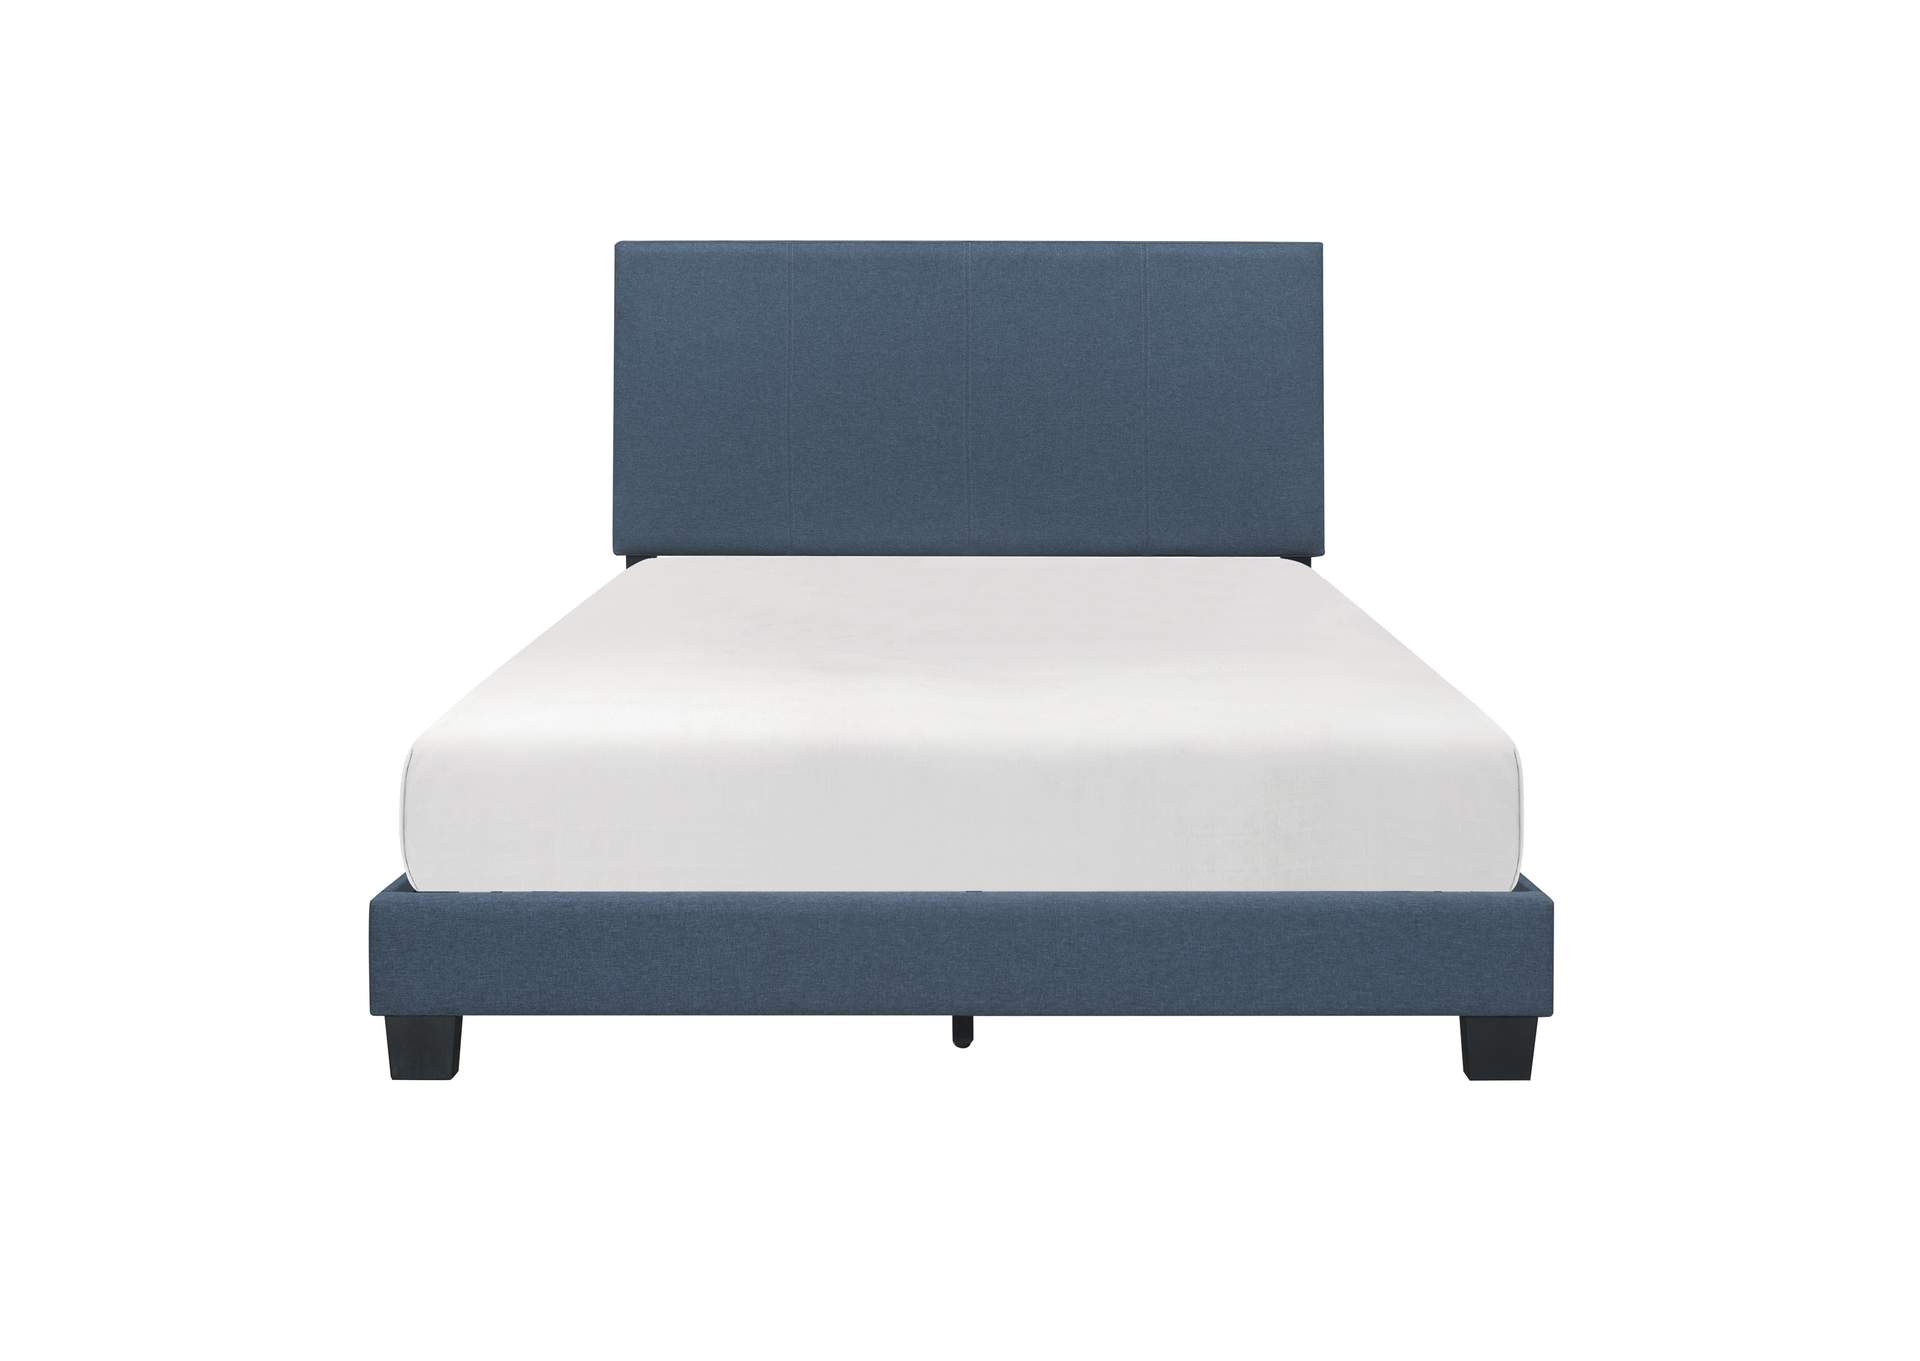 Nolens Blue California King Bed in a Box,Homelegance